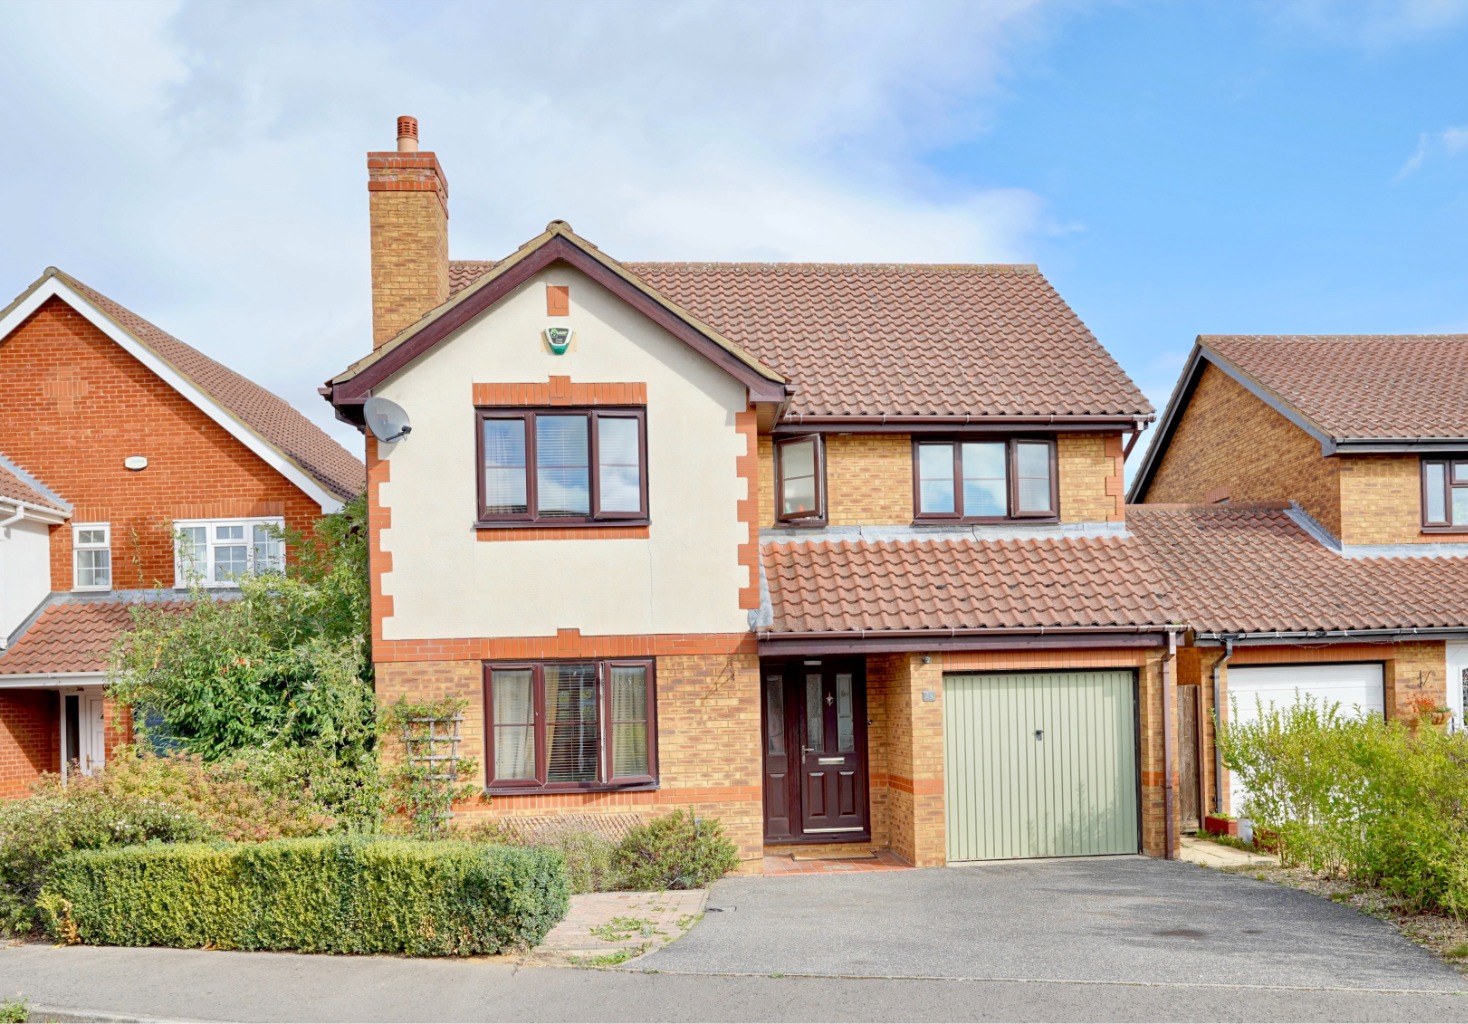 4 bed detached house for sale in Lomax Drive, Huntingdon - Property Image 1